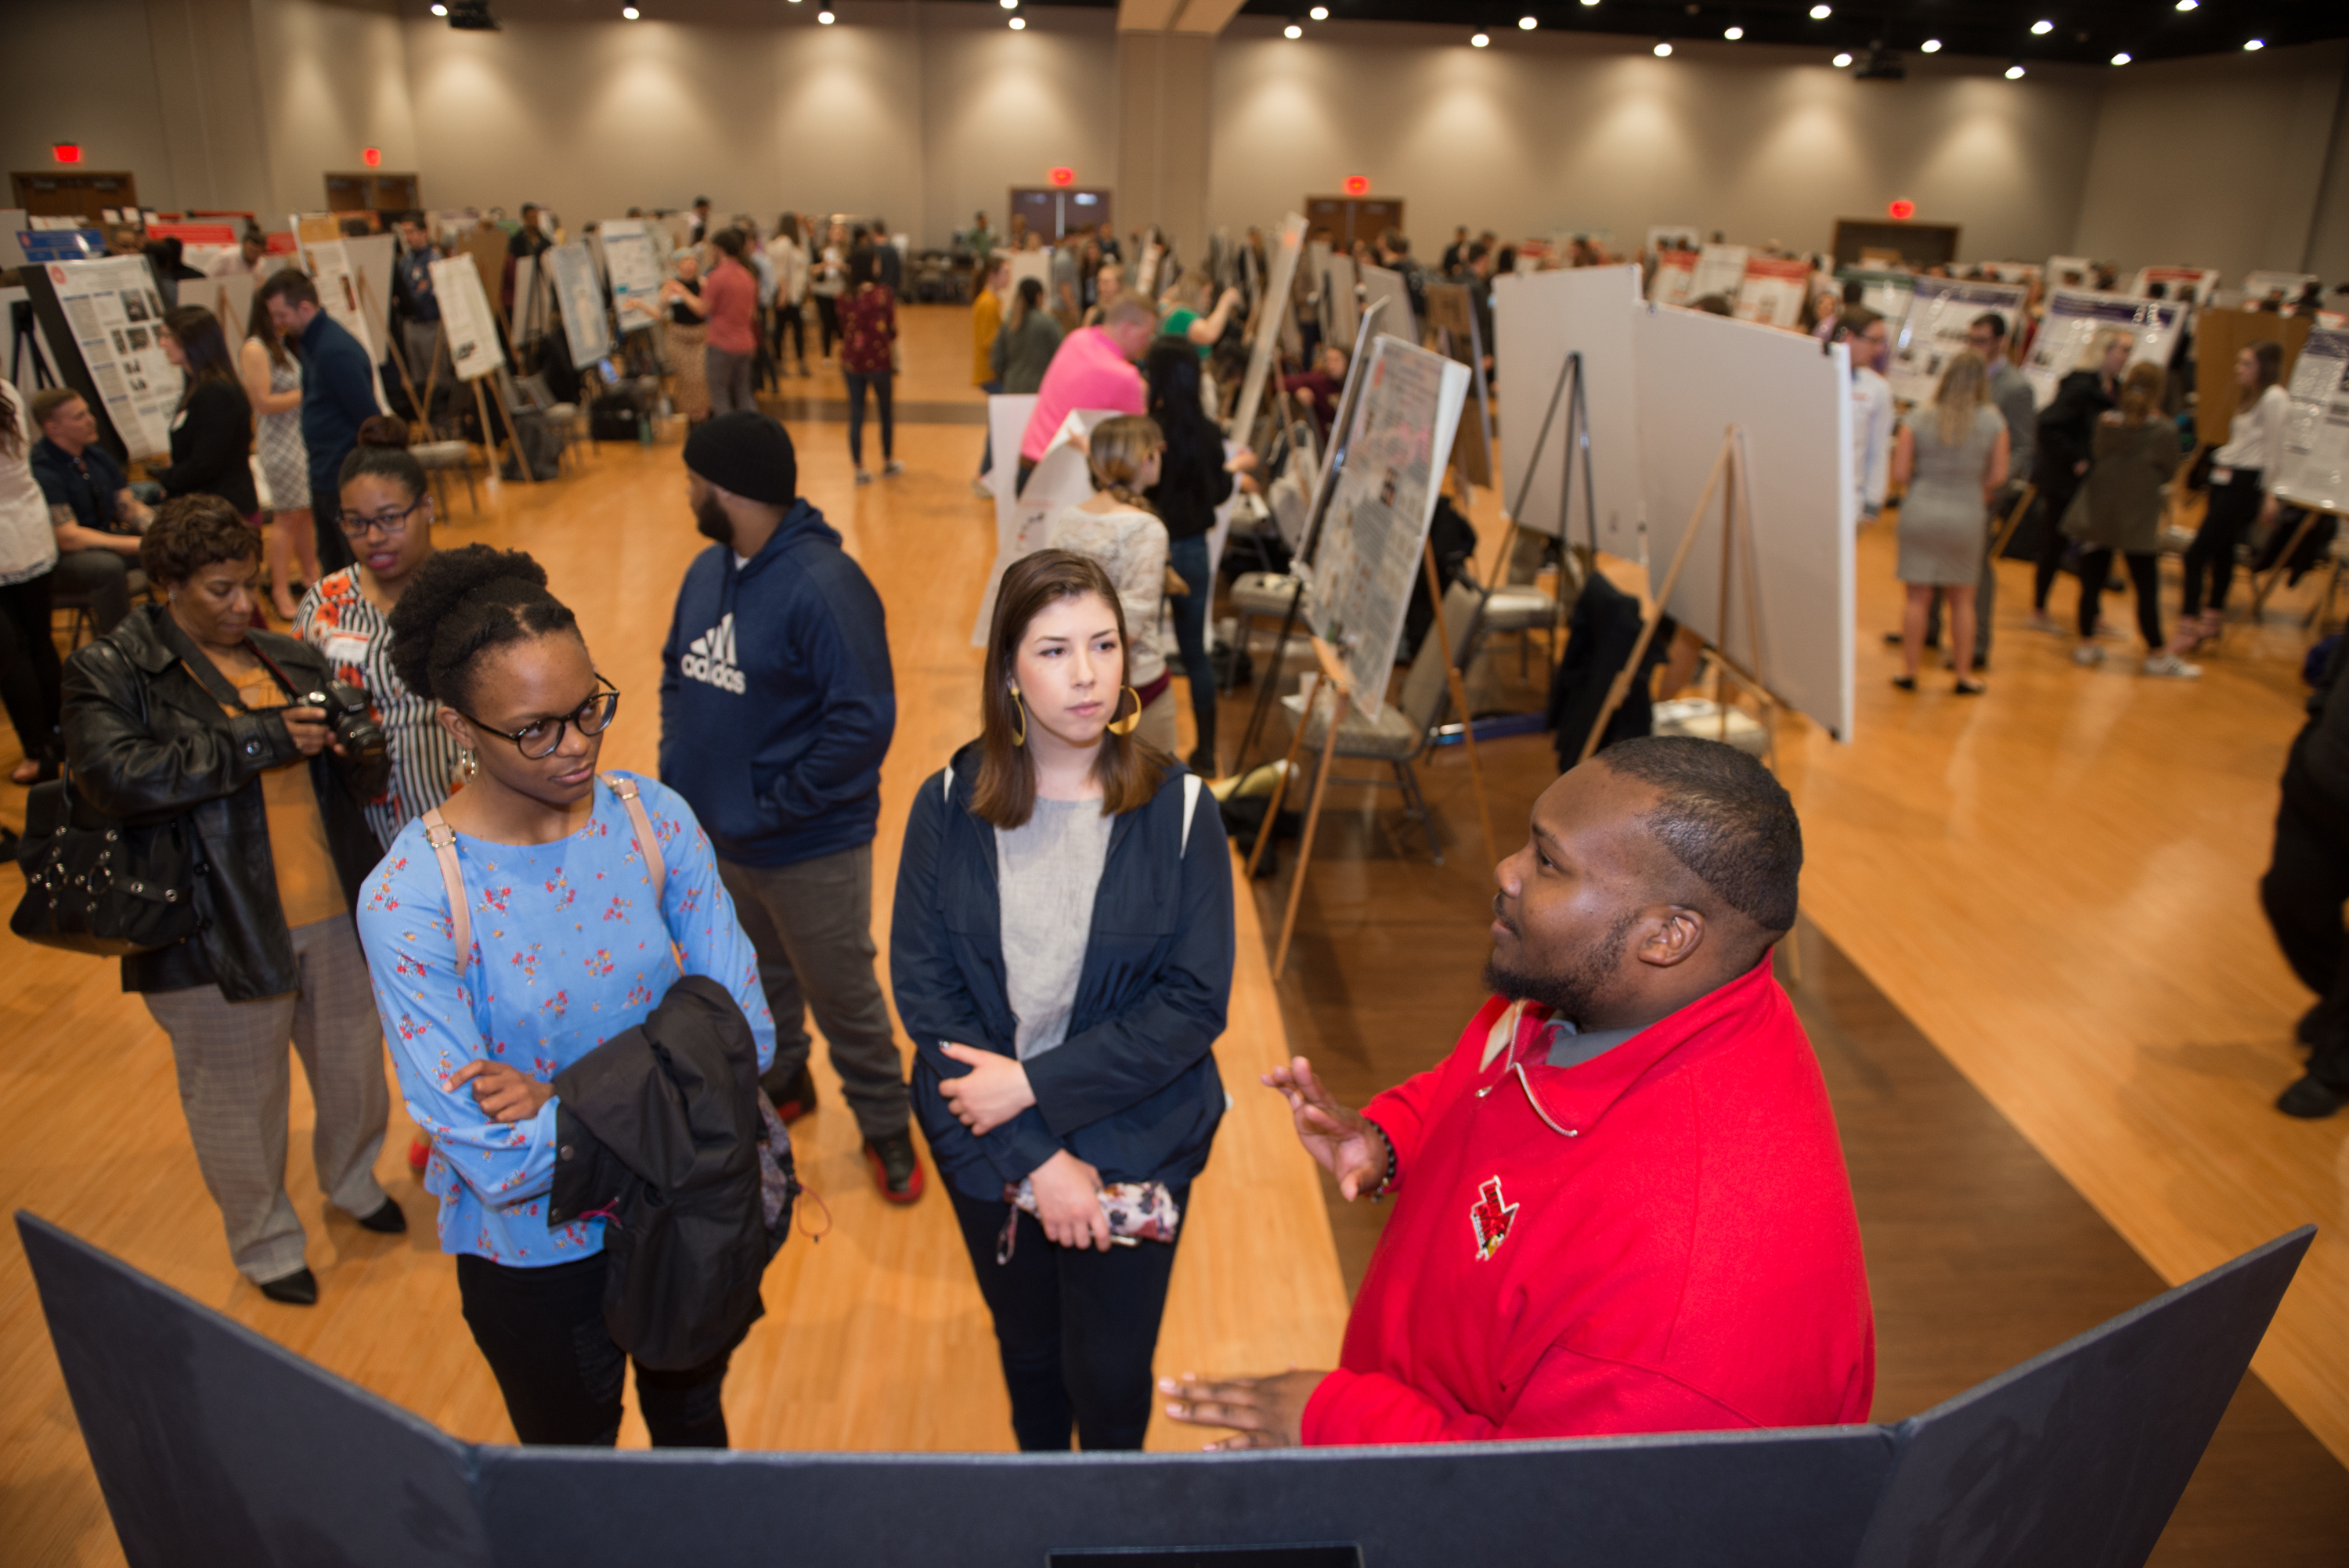 More than 400 undergraduate and graduate students presents at Illinois State's Research Symposium.